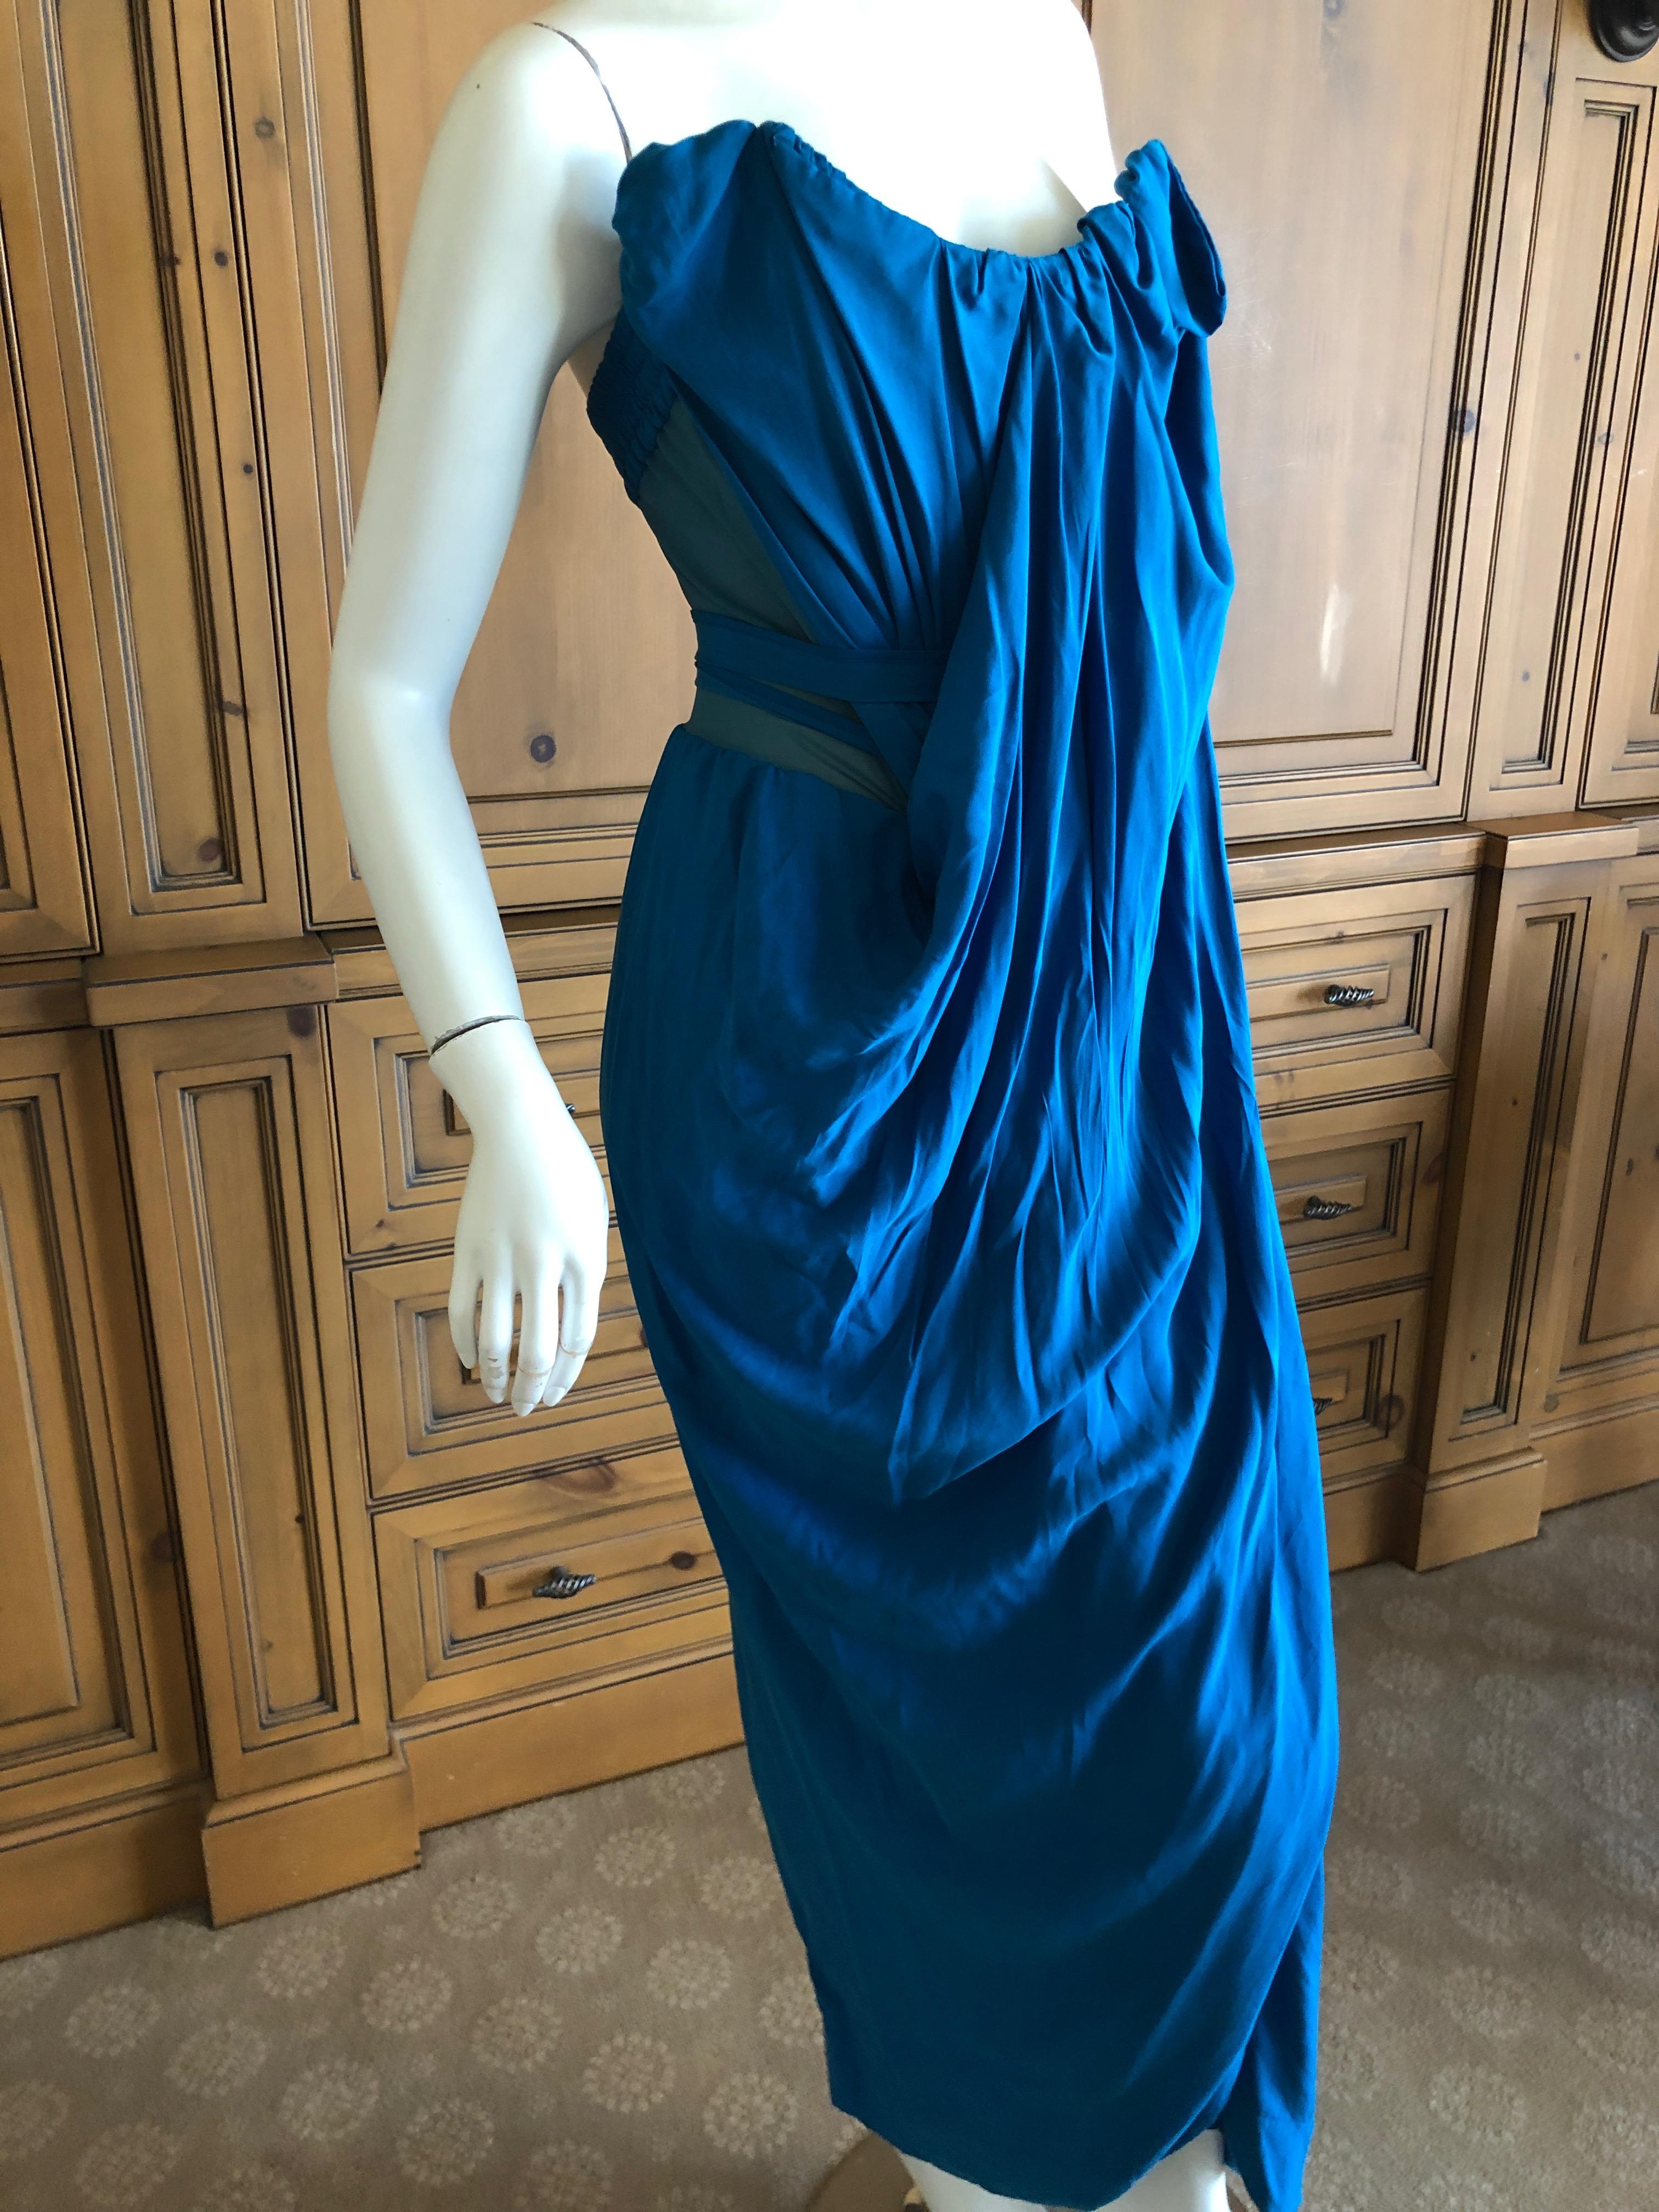 Andreas Kronthaler for Vivienne Westwood Blue Evening Dress with Built In Corset In Excellent Condition For Sale In Cloverdale, CA